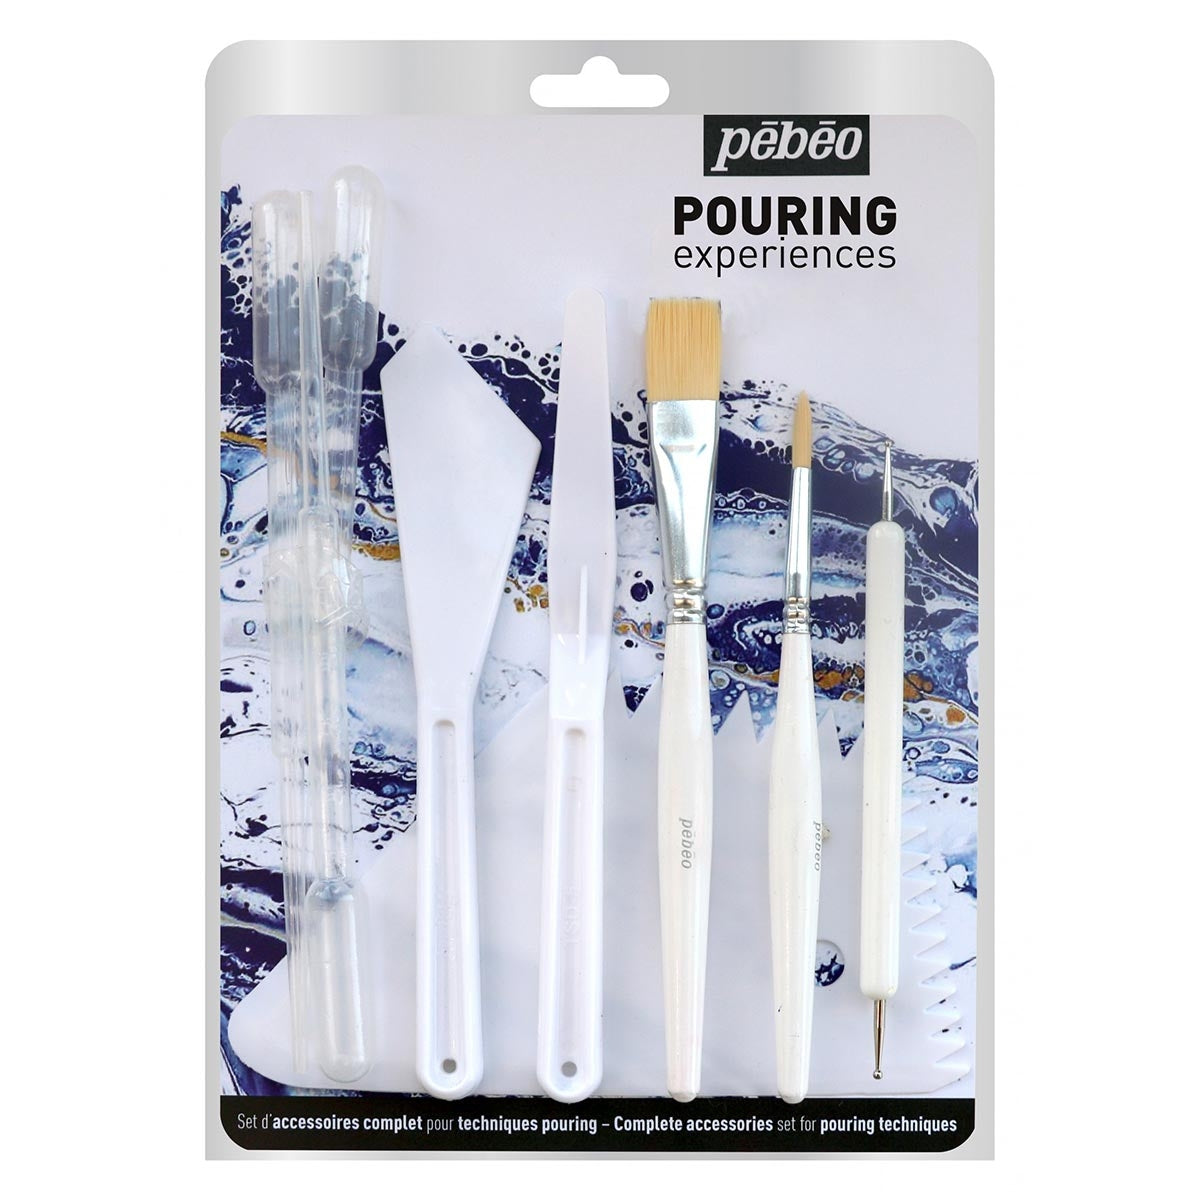 Pebeo - Accessories for Pouring Experiences - 11 Piece Set